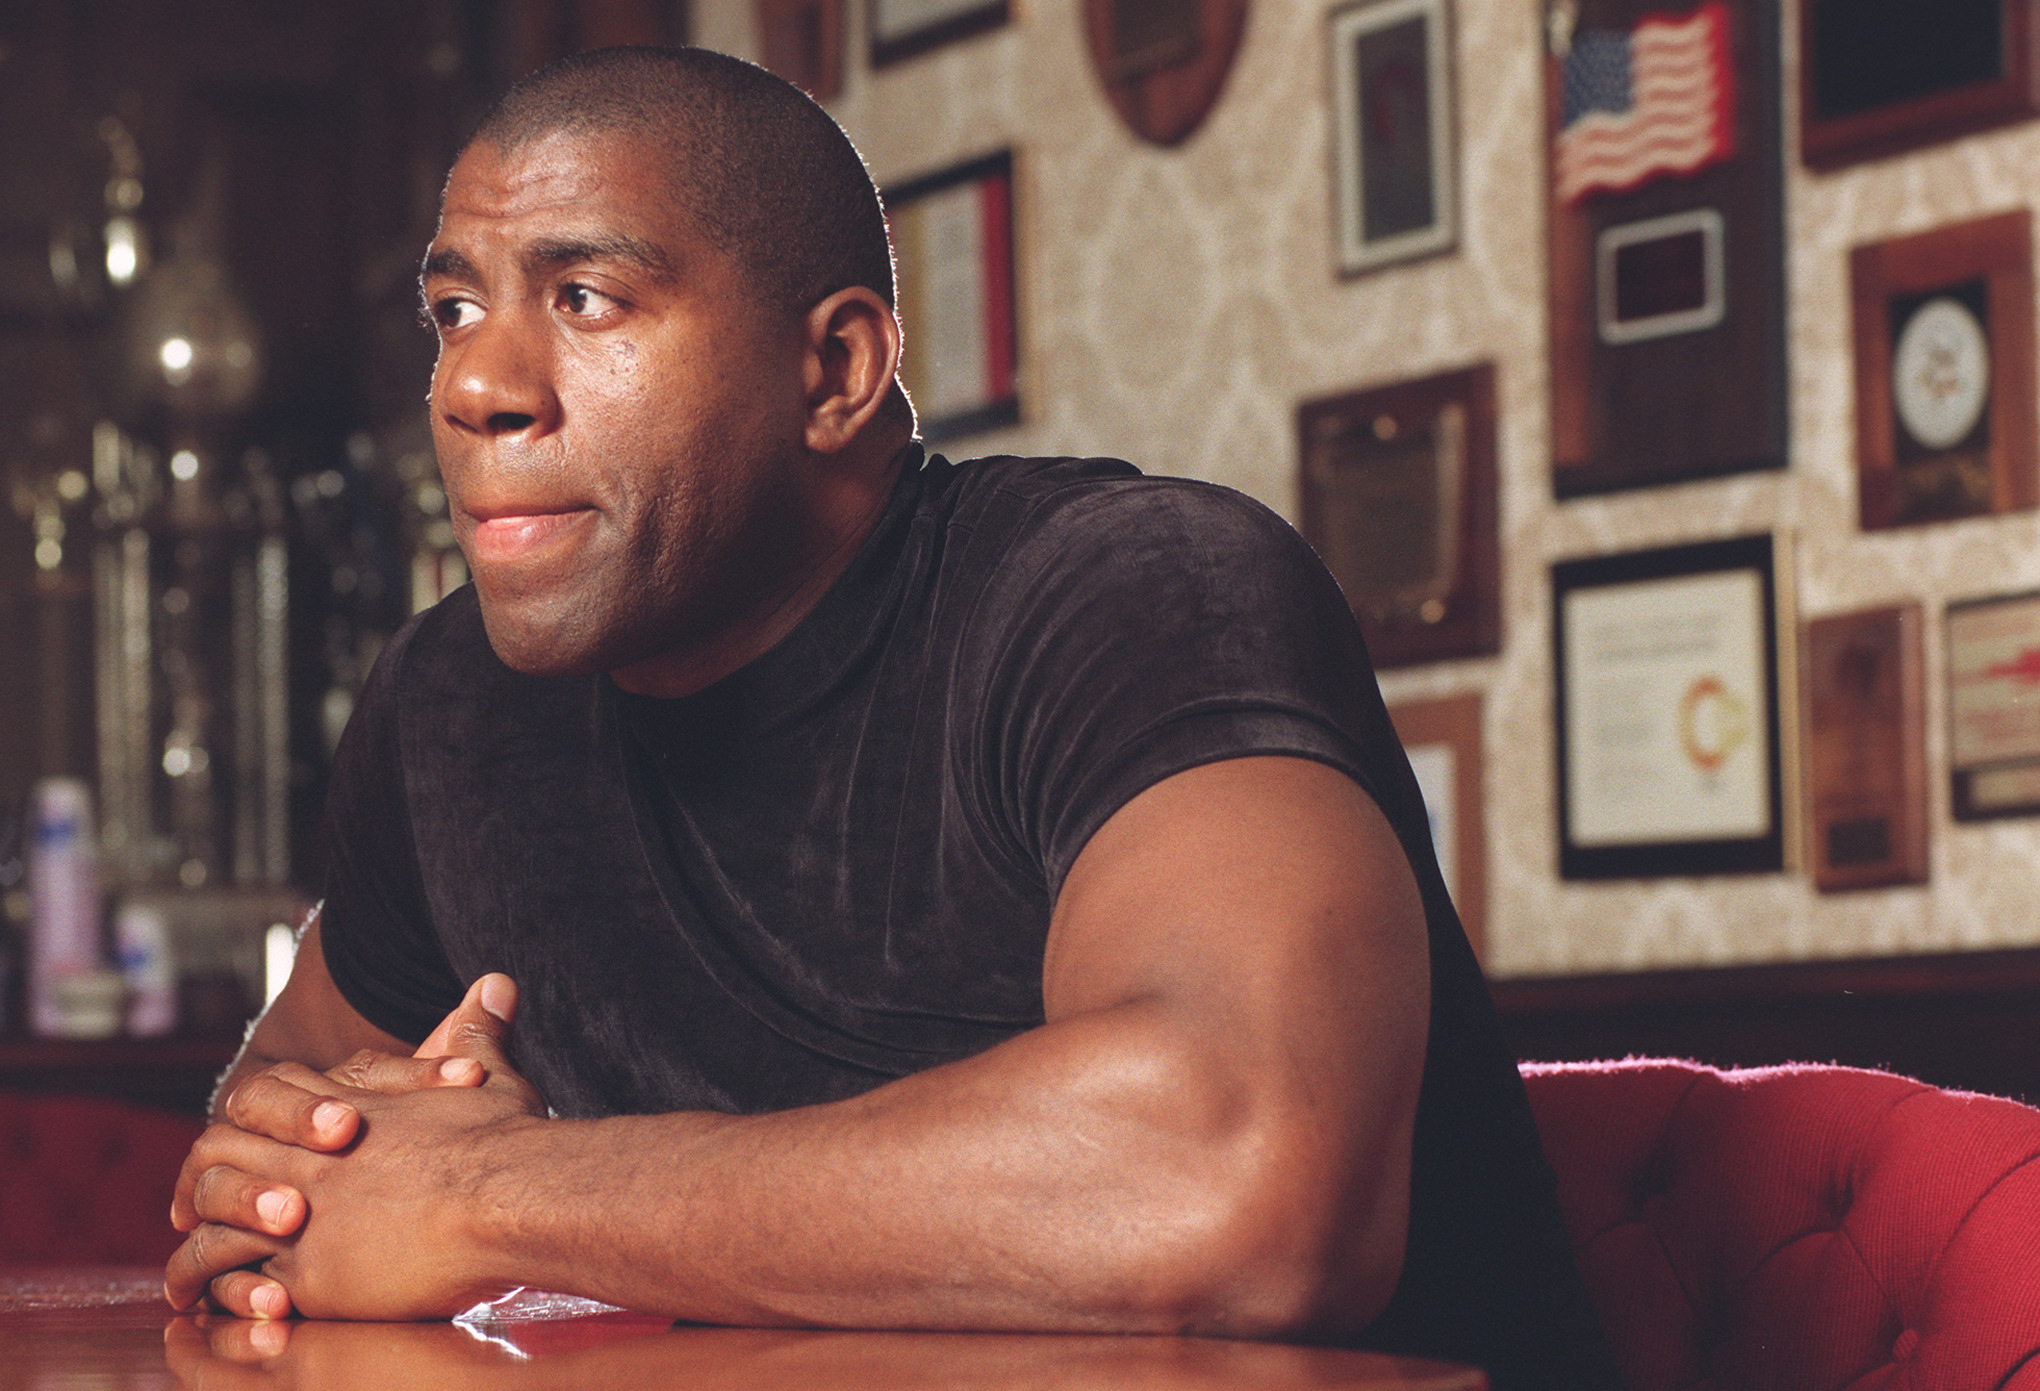 SP.Magic#1.1022.GFFive years ago, Magic Johnson announced to the world that he is HIV positive.